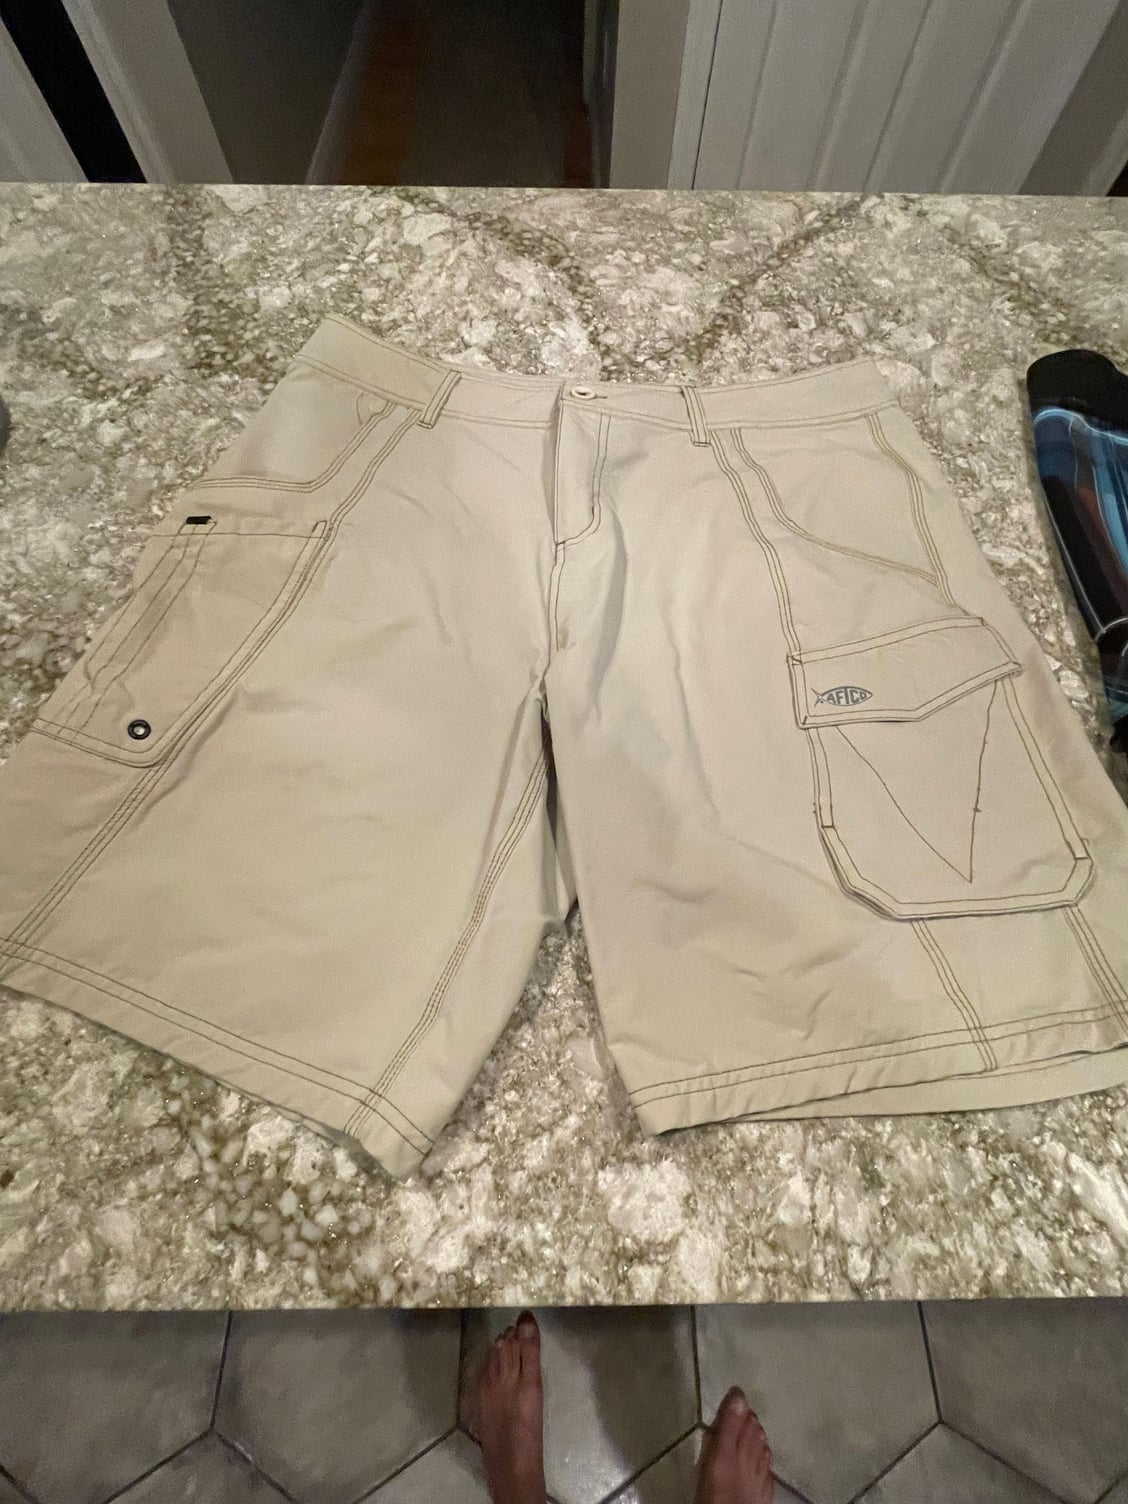 Aftco Fishing shorts - 2 pair - size 36 - The Hull Truth - Boating